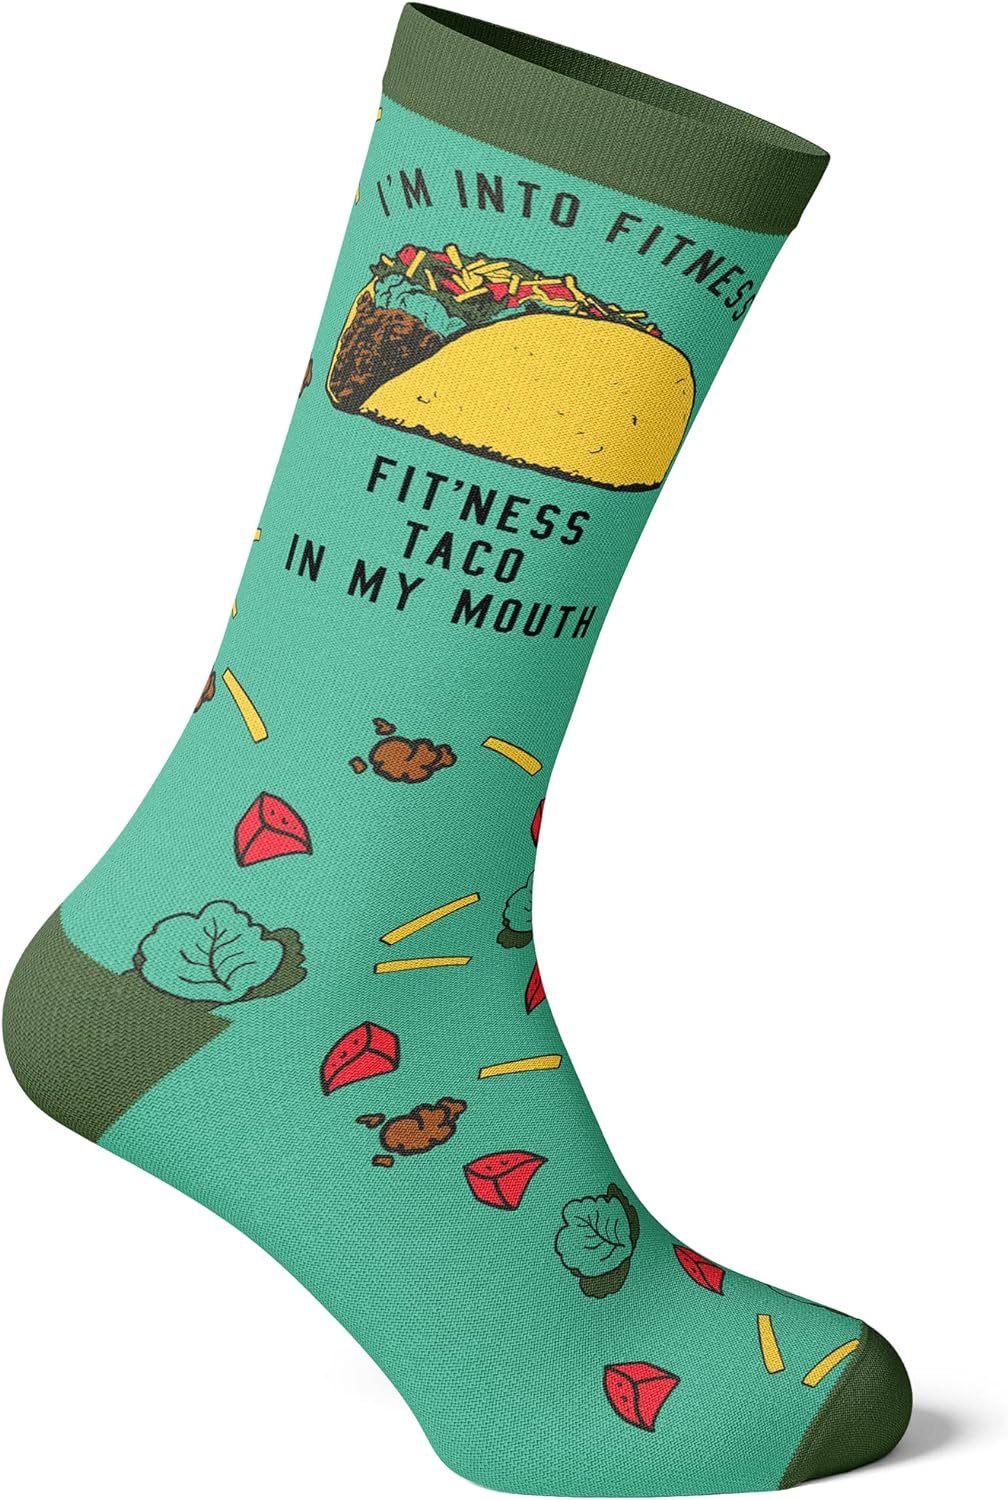 Fitness Taco Sock Funny Cute And Humor Sarcastic Graphic Cool Crazy Footwear (Green) Review